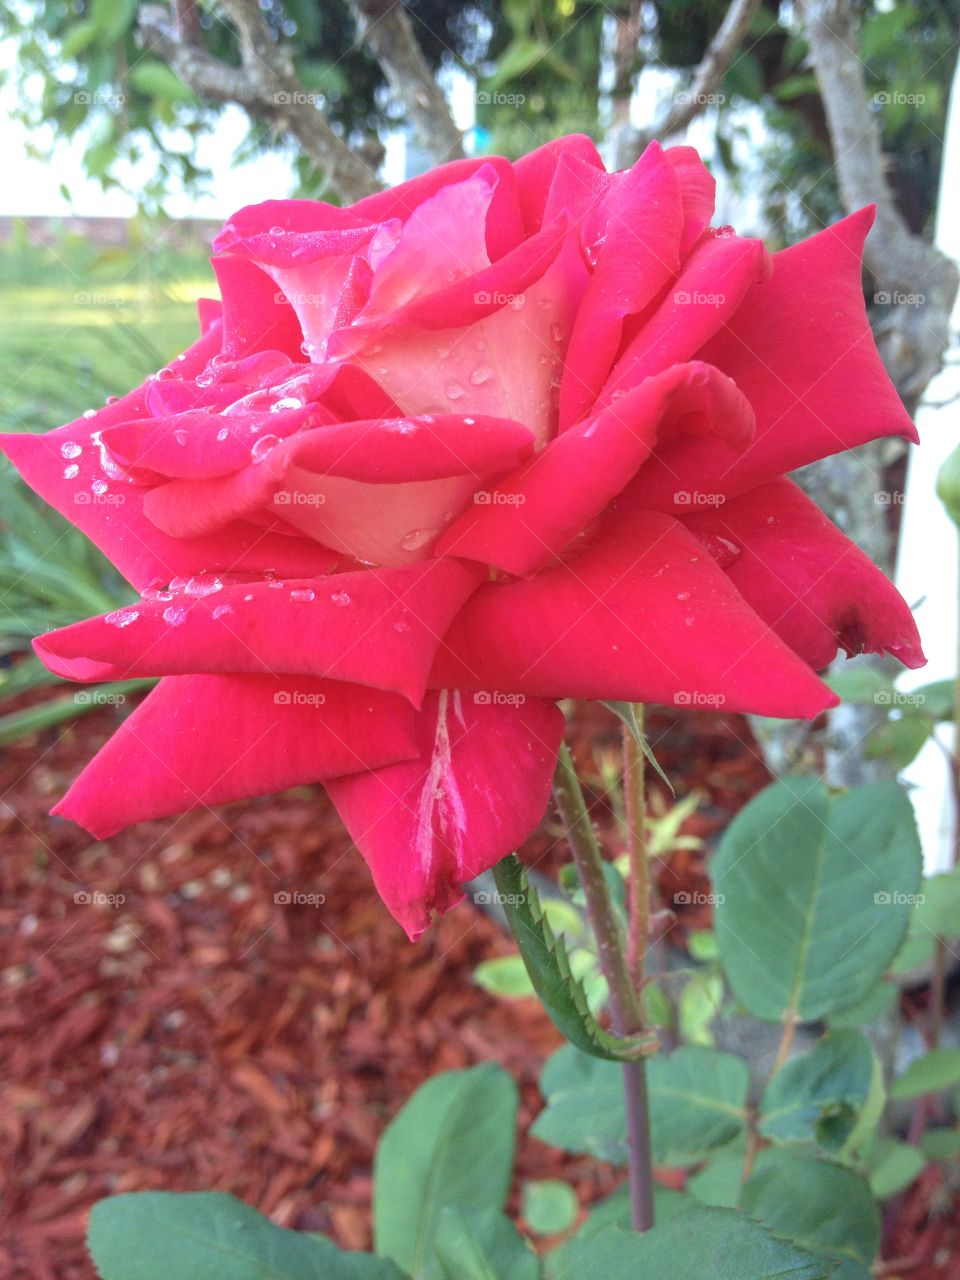 Rose bloom covered in morning dew.